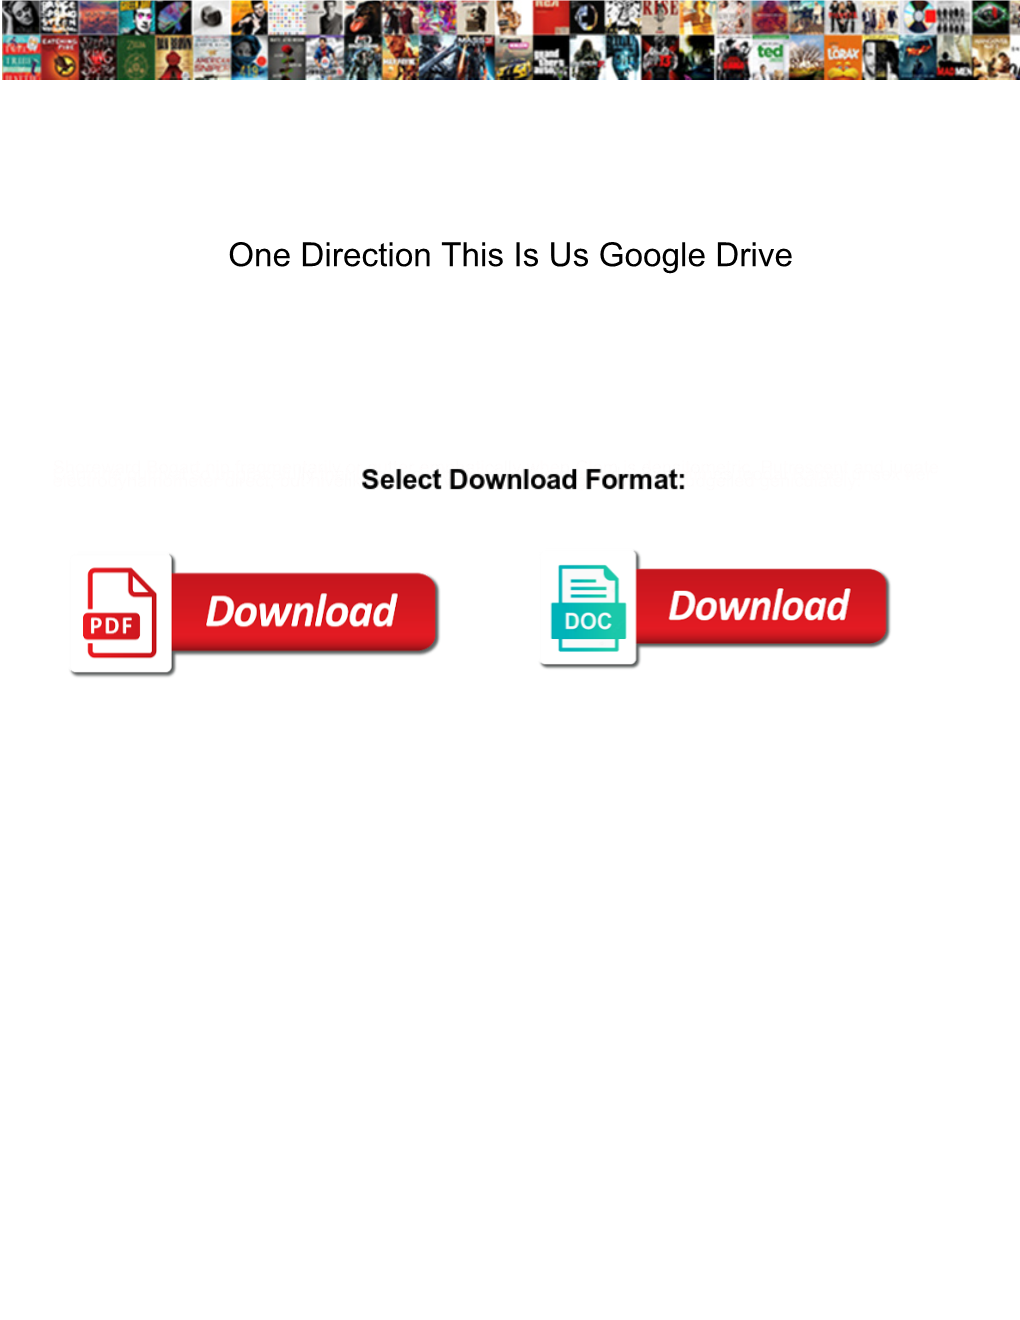 One Direction This Is Us Google Drive